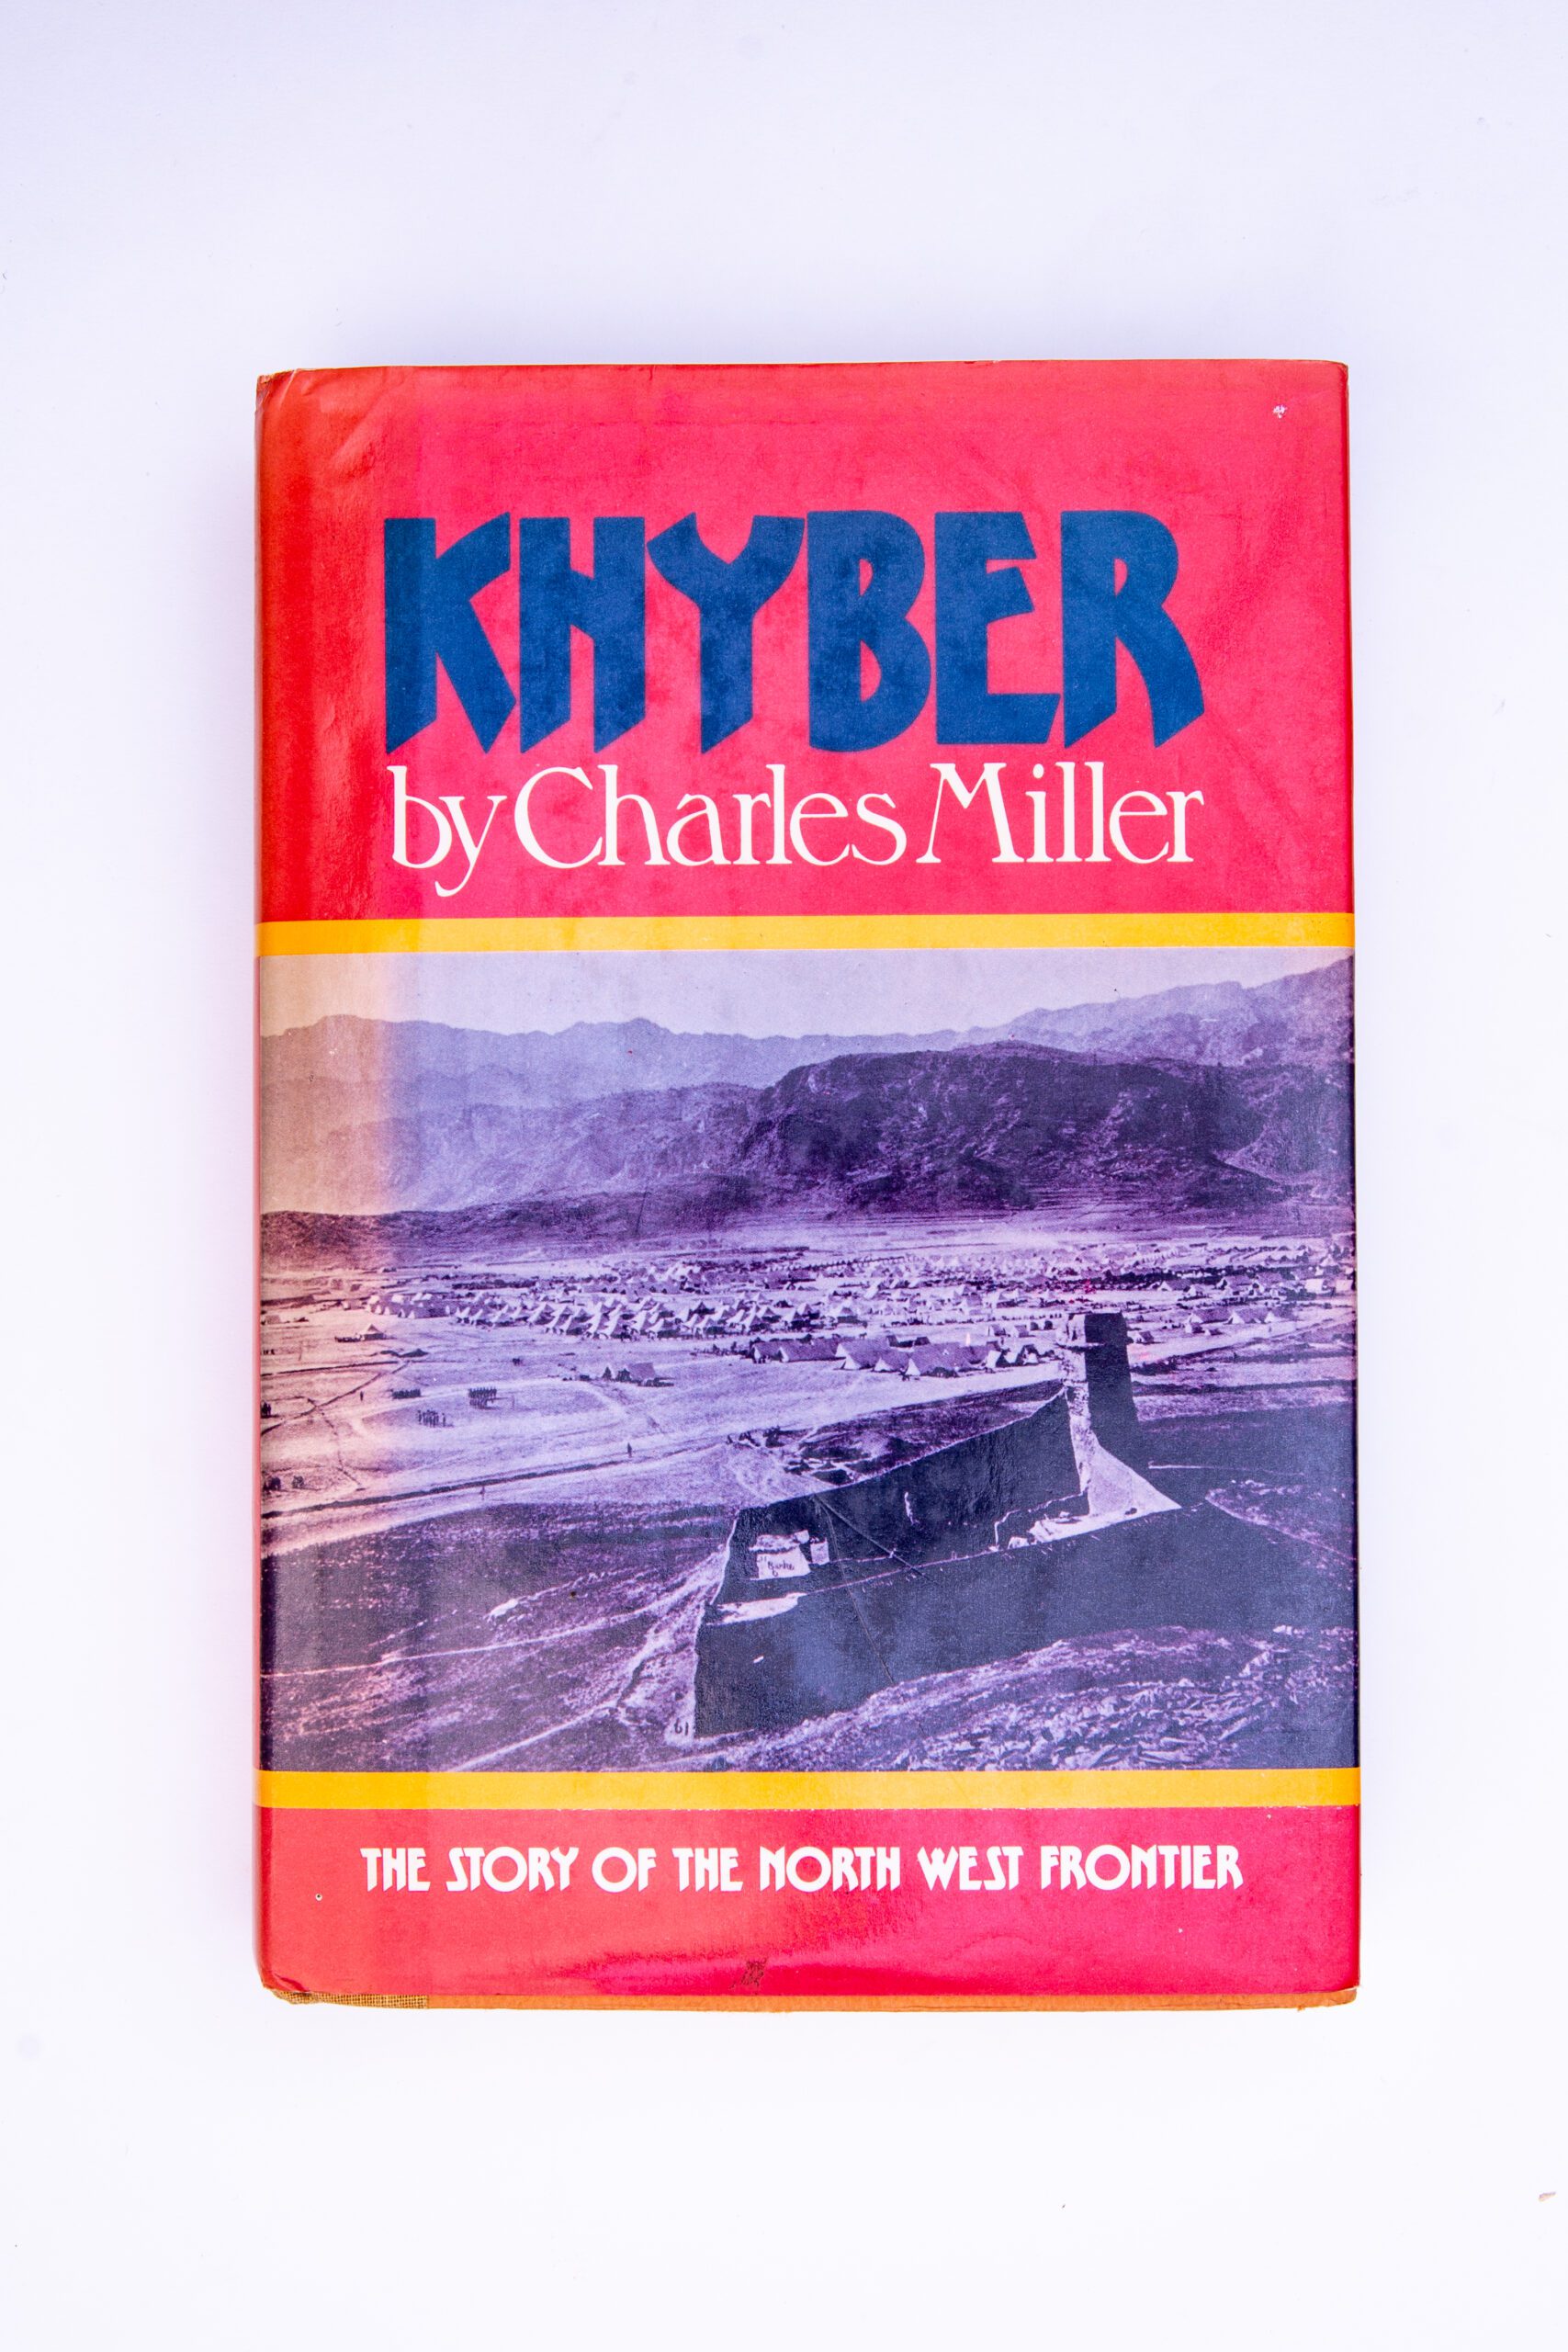 Khyber by Charles Miller